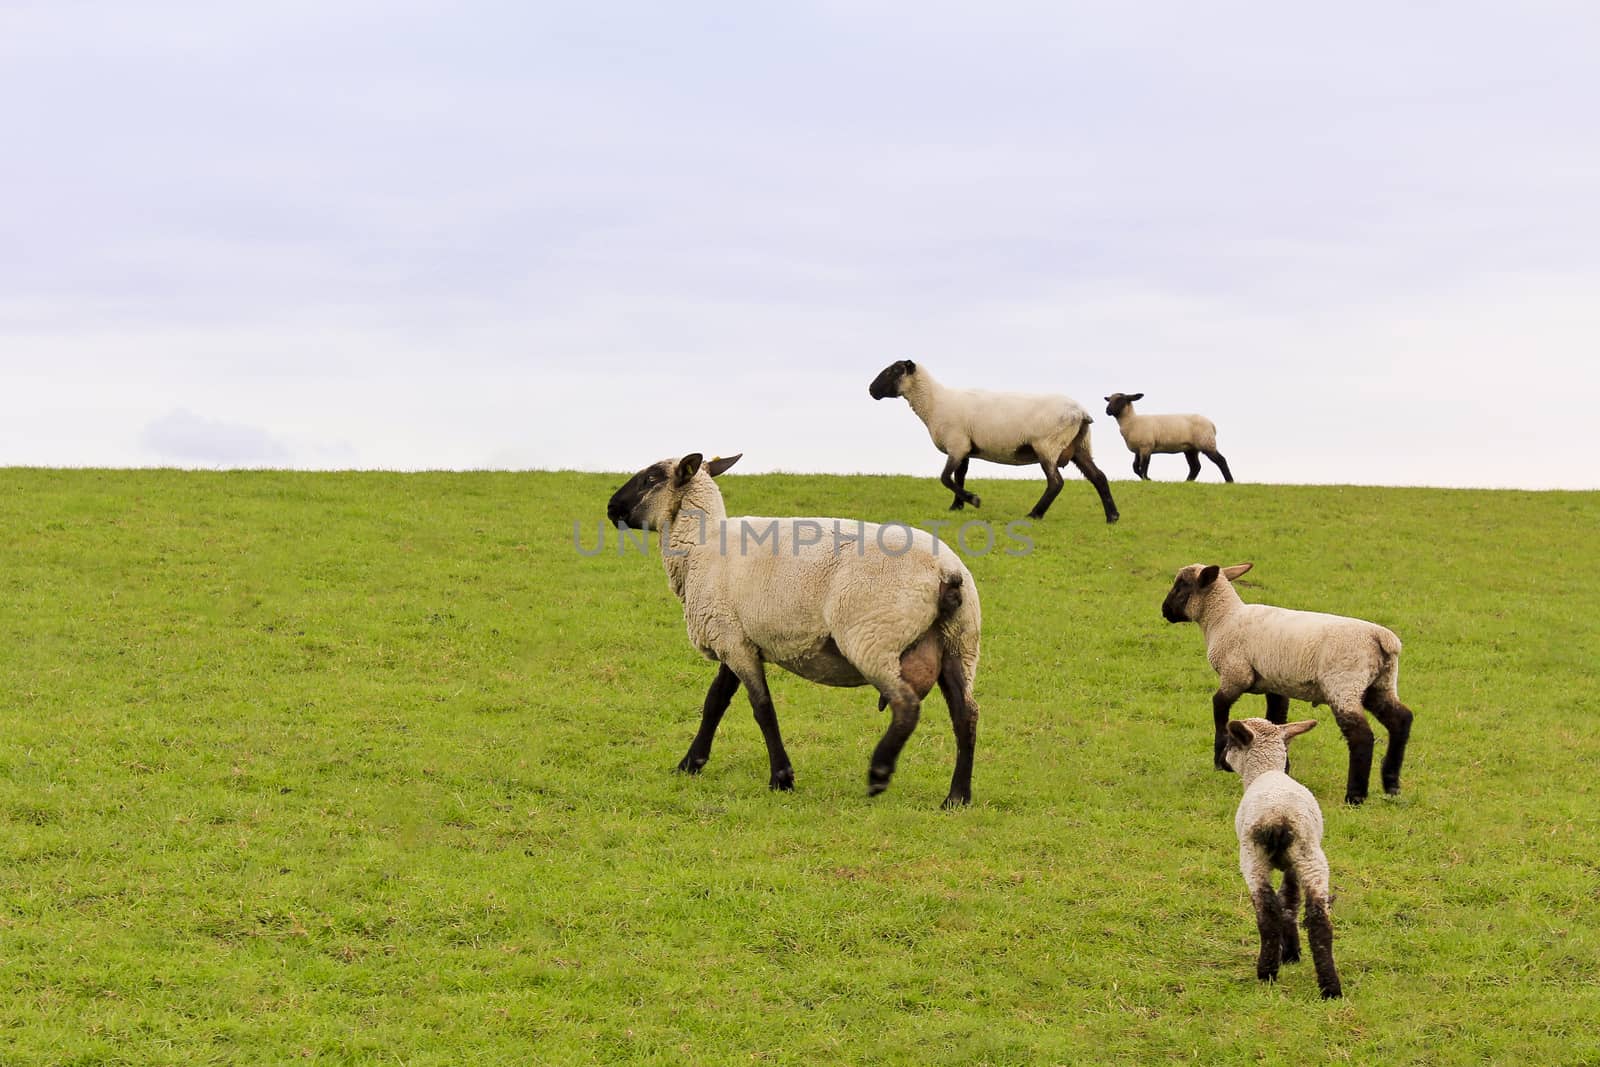 Flock of sheep walking on green meadow in the countryside in Lower Saxony, Germany.